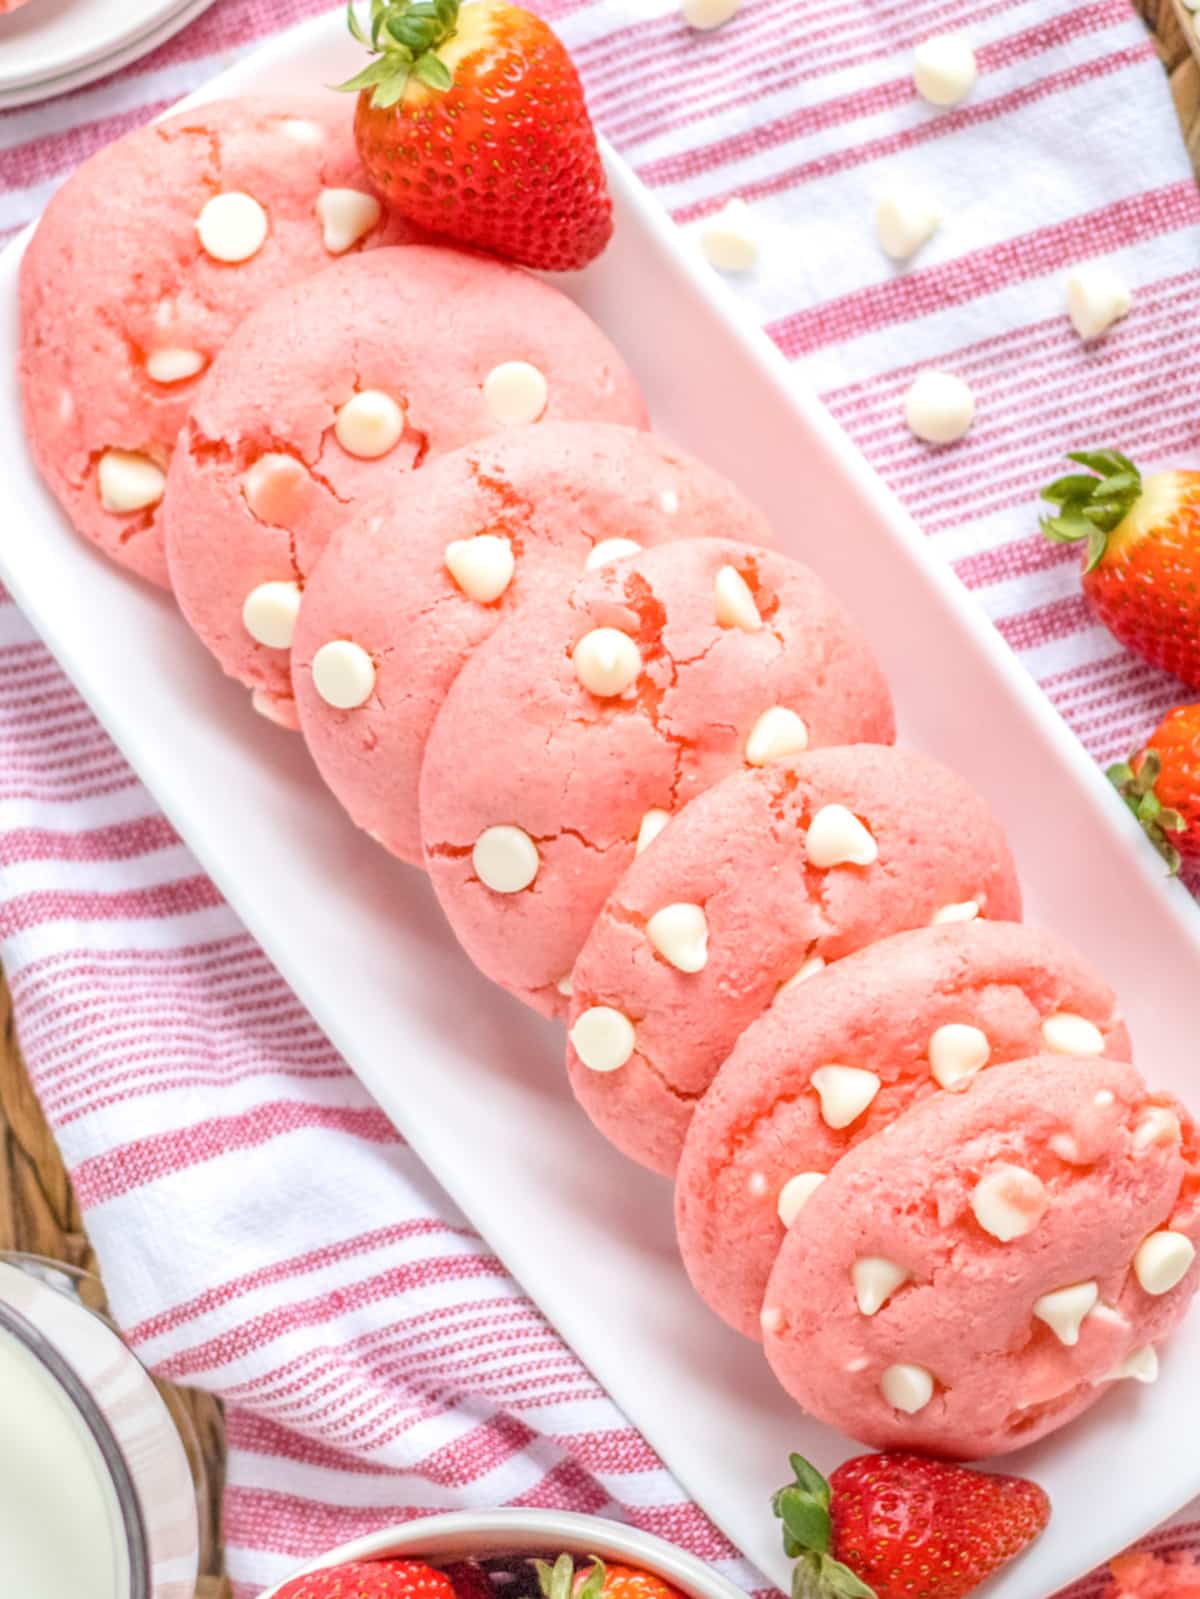 Strawberry cheesecake cookies arranged on a rectangular plate with a red and white striped towel